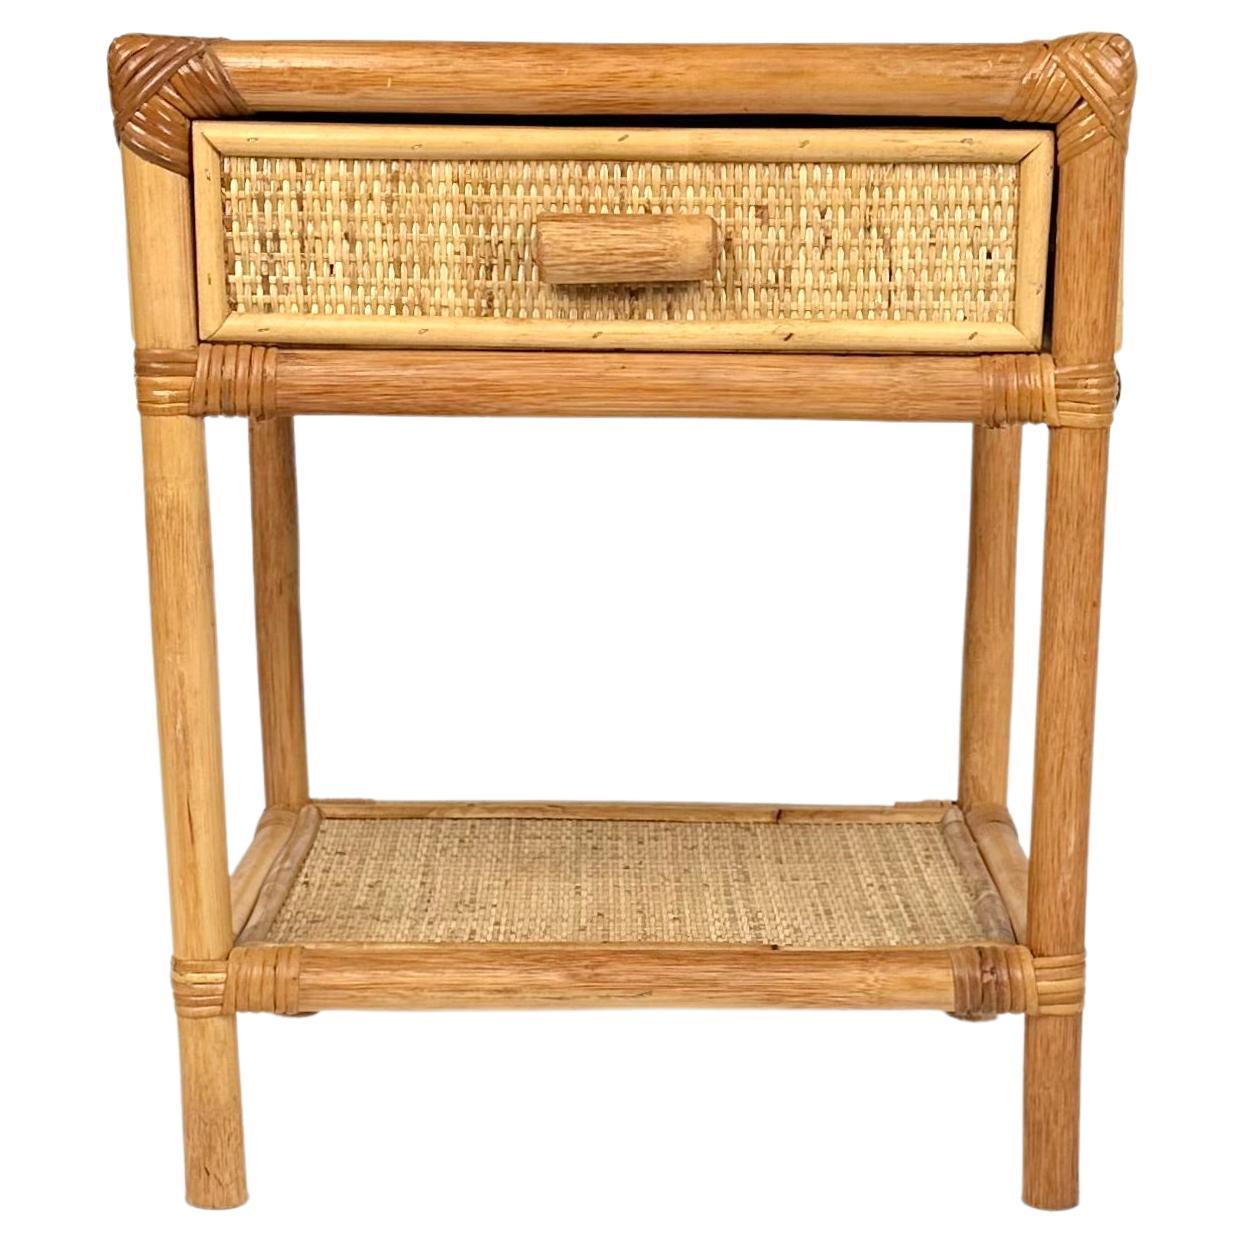 Italian Midcentury Bedside Table Nightstand in Bamboo & Rattan, Italy, 1970s For Sale